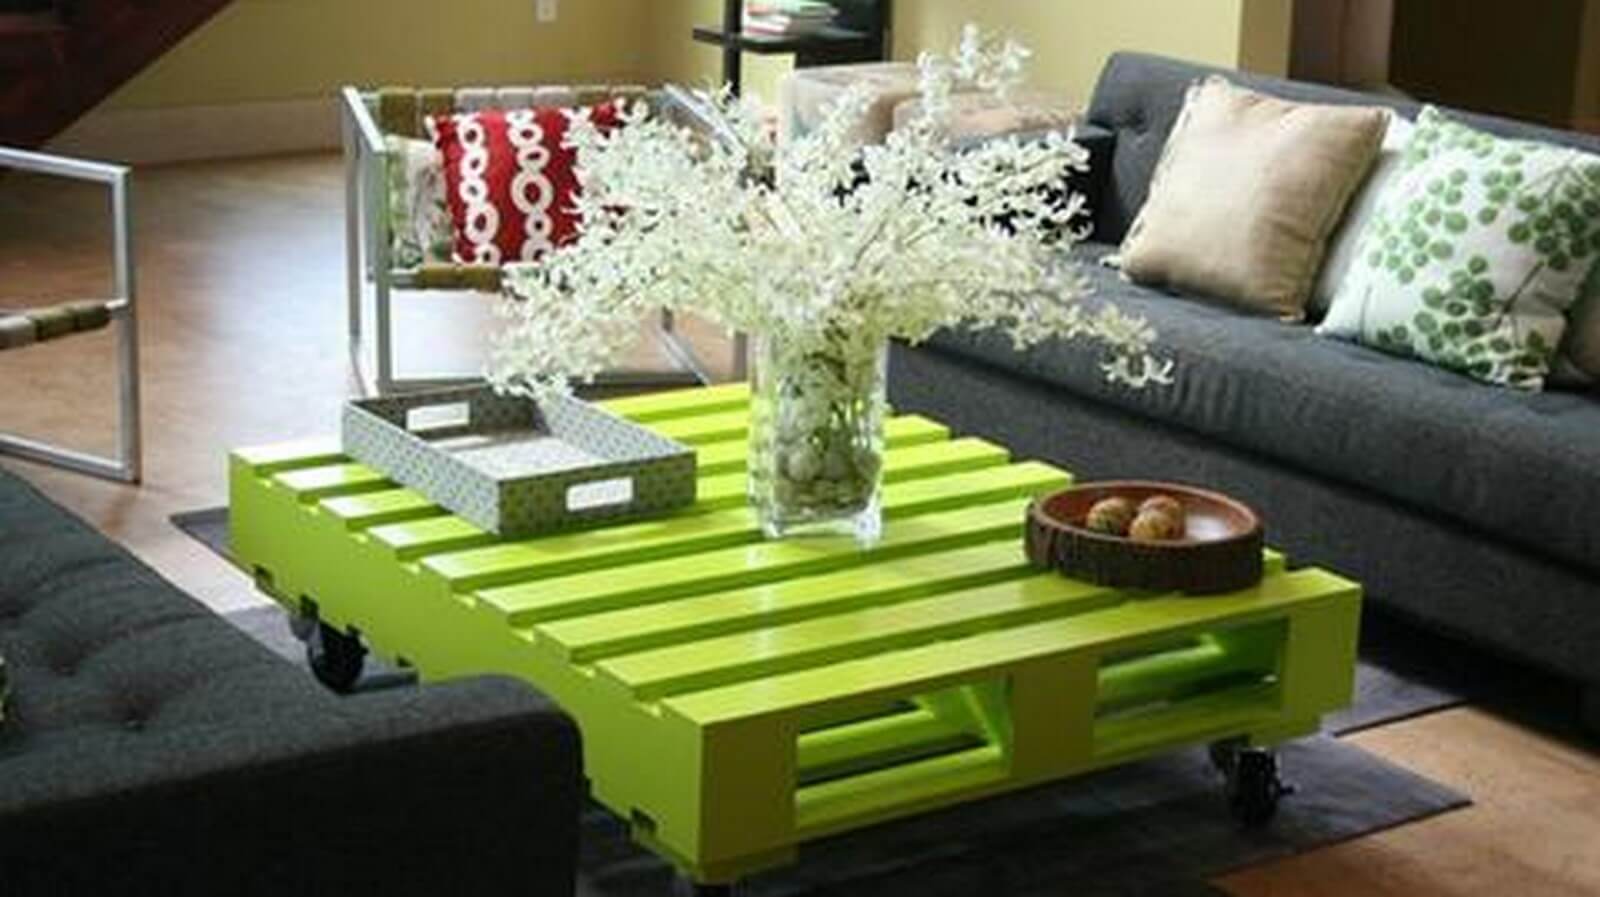 14. Coffee table with pallet